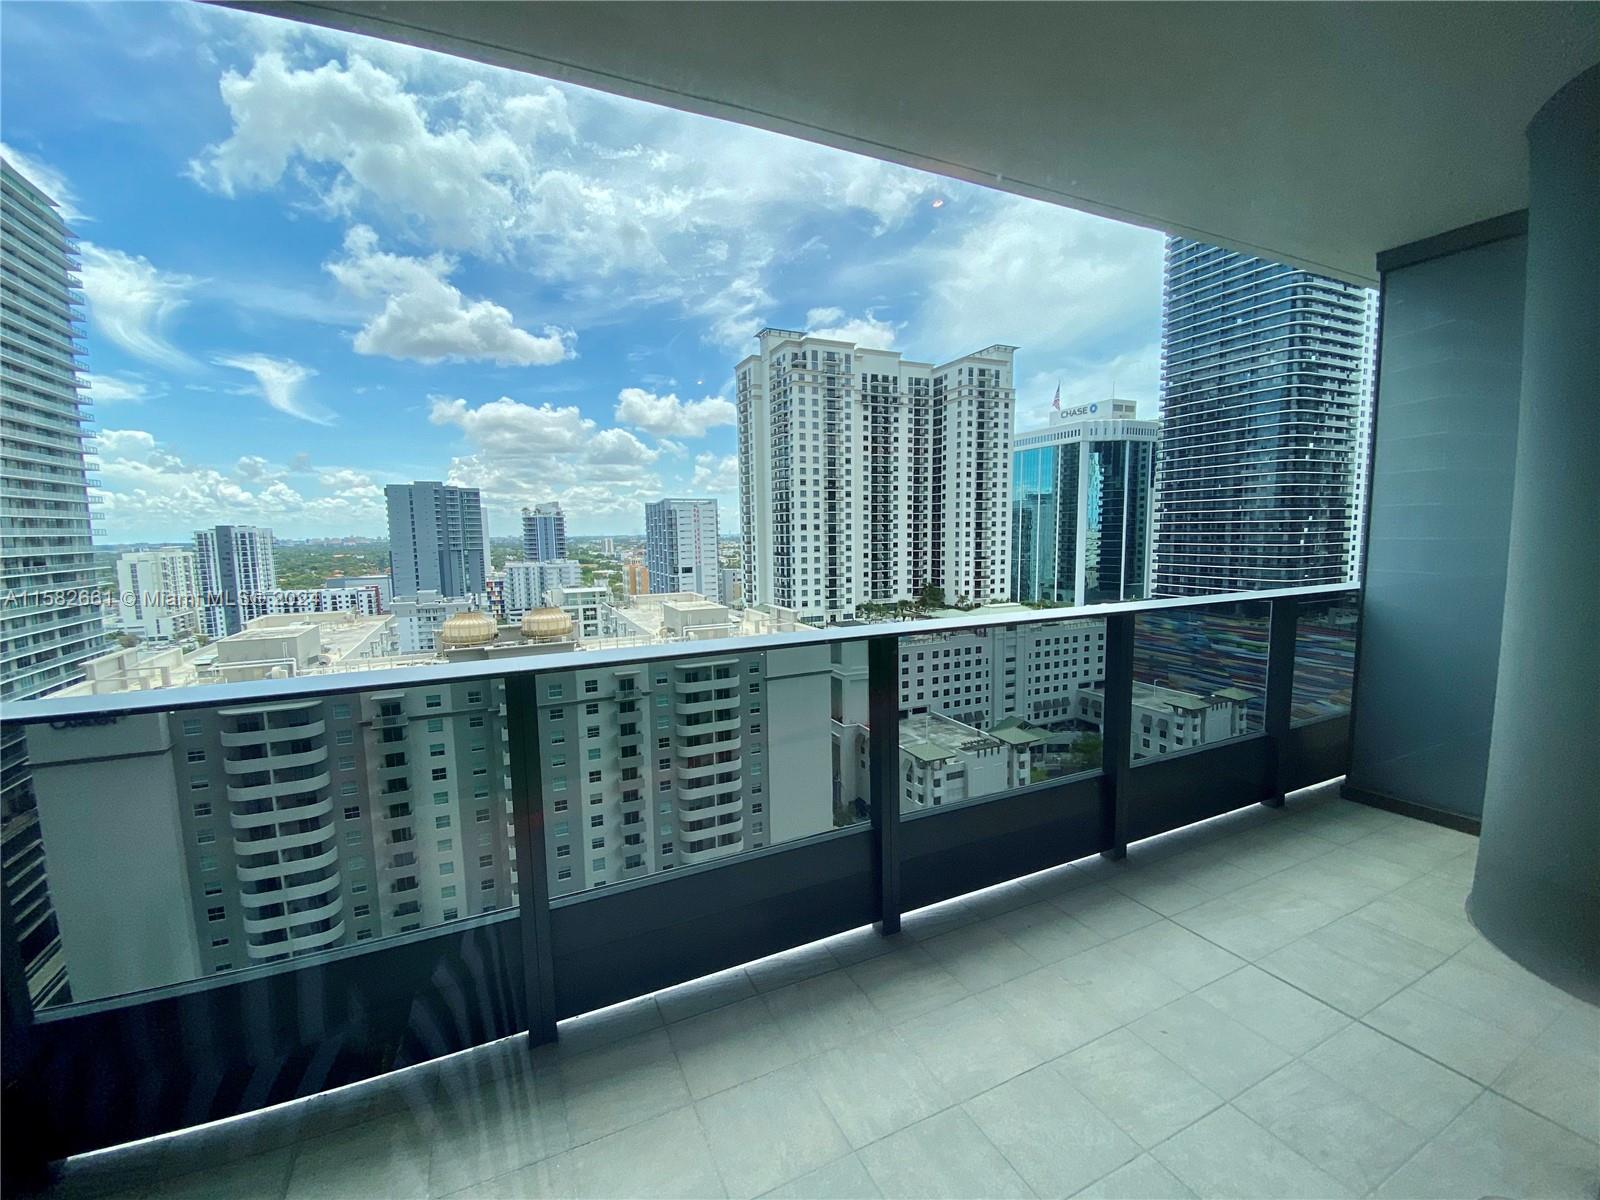 Welcome to Flatiron Brickell, where luxury living meets the vibrant energy of Miami's most exciting neighborhood. This stunning 1 bed-1.5 bath features high-end finishes and views of the city. As you enter, you'll be greeted by an open- concept living space with floor-to-ceiling windows that flood the space with natural light. Kitchen is equipped with top-of-the-line Miele appliances. Master bathroom has a modern vanity & separate tub and shower. Residents enjoy exclusive amenities, rooftop pool, sundeck, fully equipped fitness center & spa. Located in heart of Brickell, Flatiron is surrounded by world-class dinning, shopping and entertainment options. Steps away from Brickell City Centre and Mary Brickell Village.